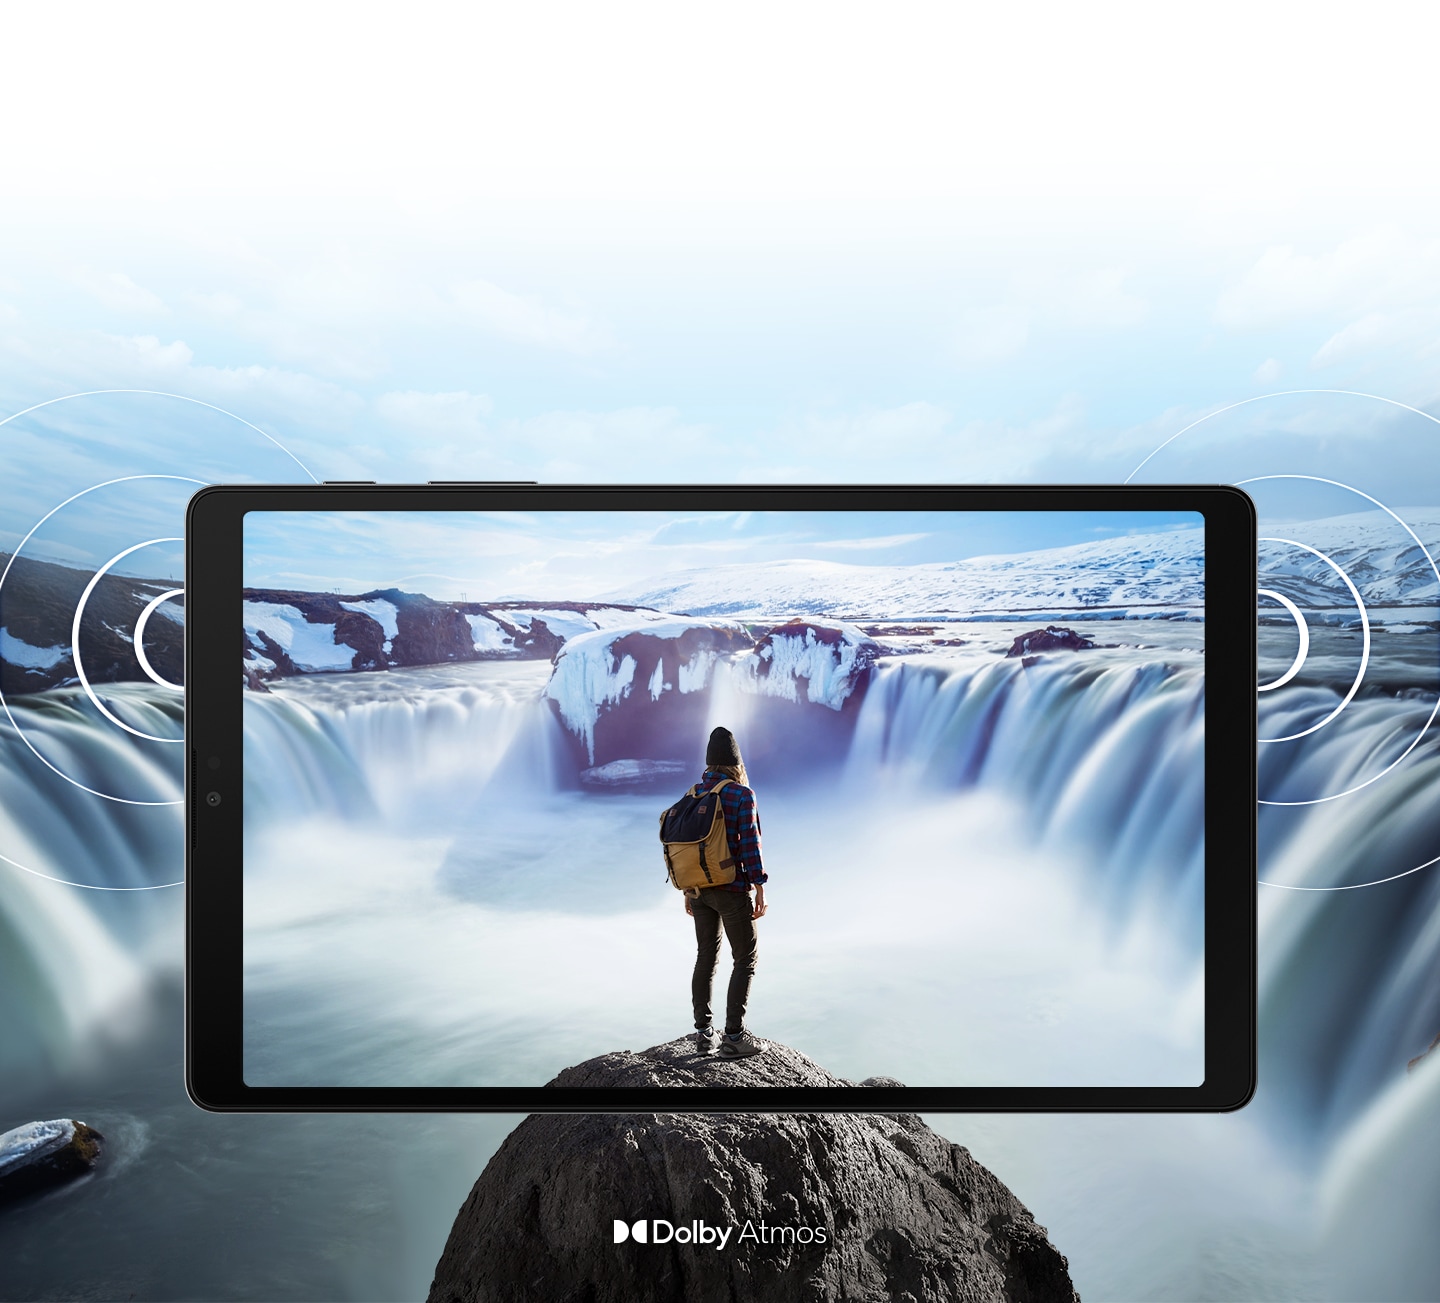 Galaxy A7 Lite seen from the front with an image of a person standing on a rock in front of steaming waterfalls on either side onscreen. The image expands past the edges of the tablet to show the expansiveness of the display. Rings come out from the sides to demonstrate the location of the dual speakers and the immersive sound of Dolby Atmos.